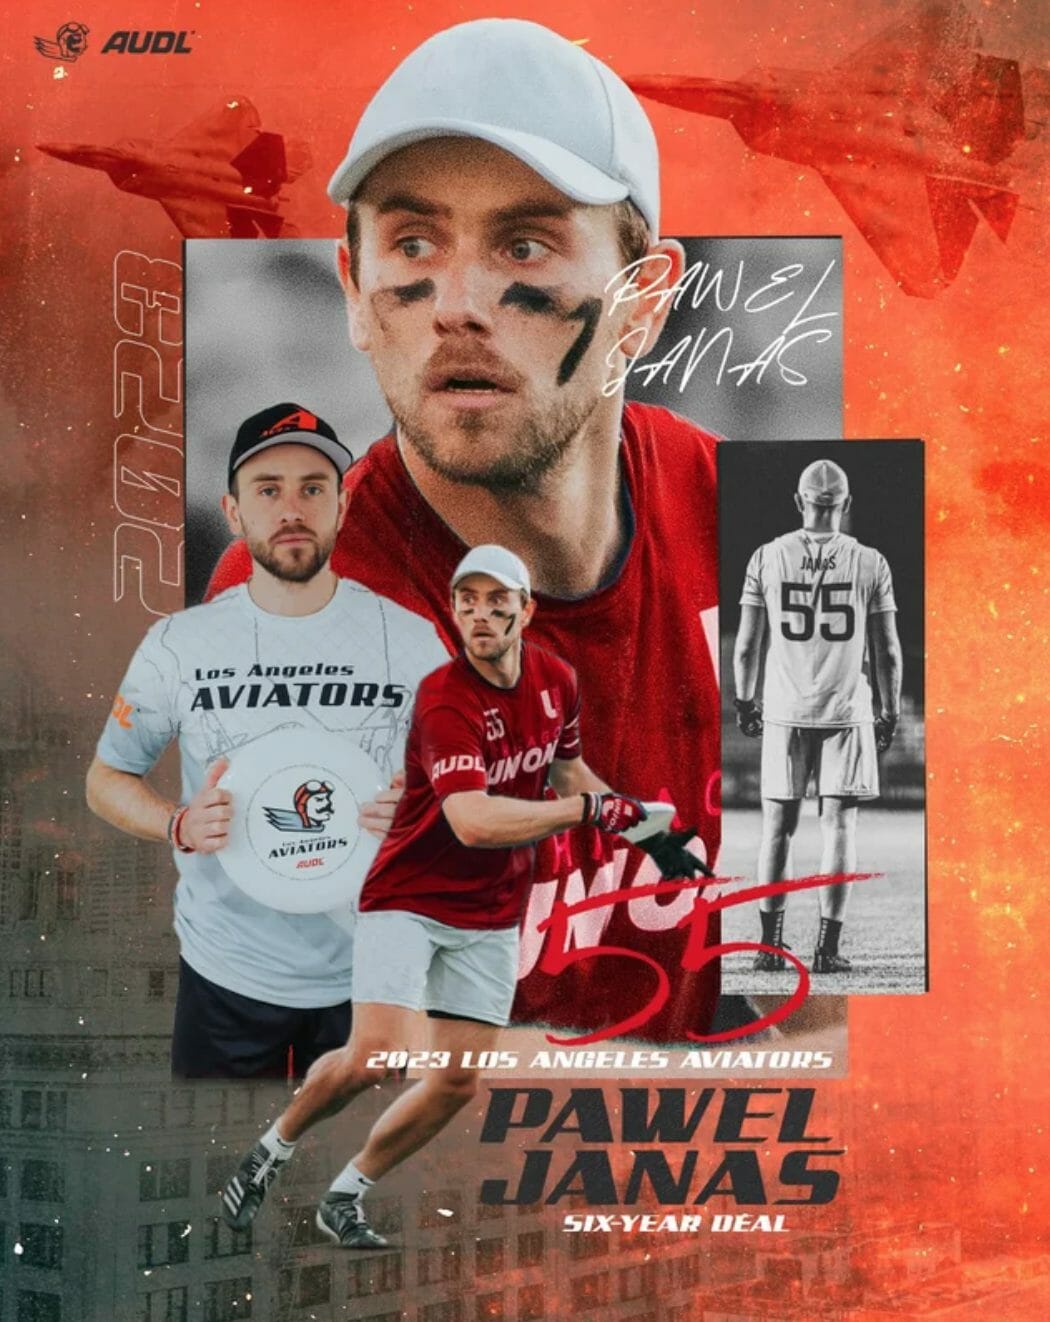 Pawel Janas signed a 6 year contract with the LA Aviators this month.